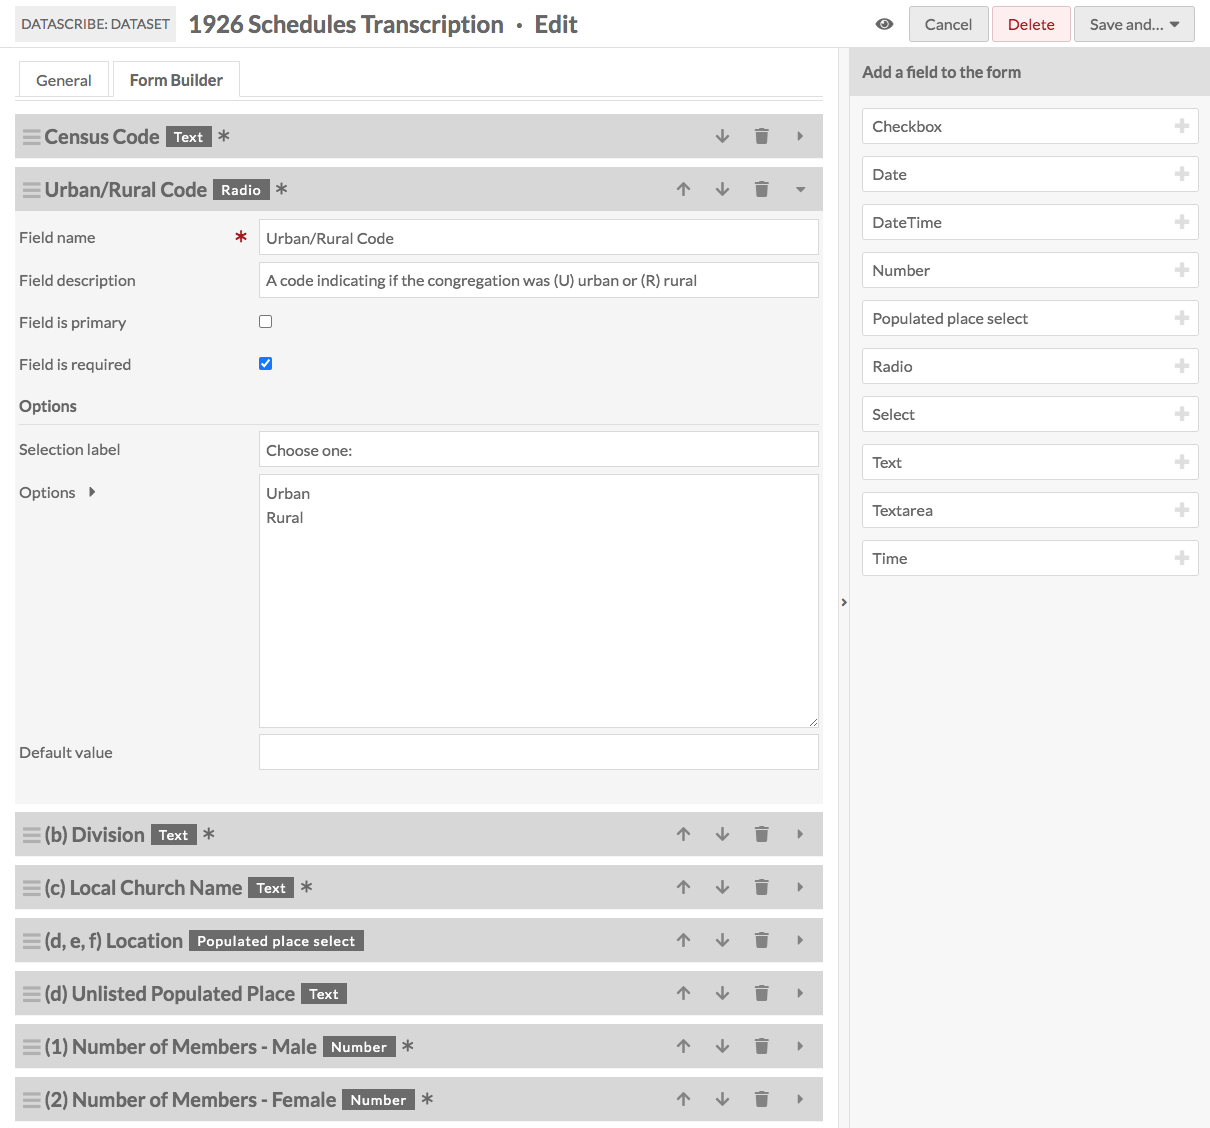 Figure 3. Screenshot from Datascribe of the form builder for transcribing.